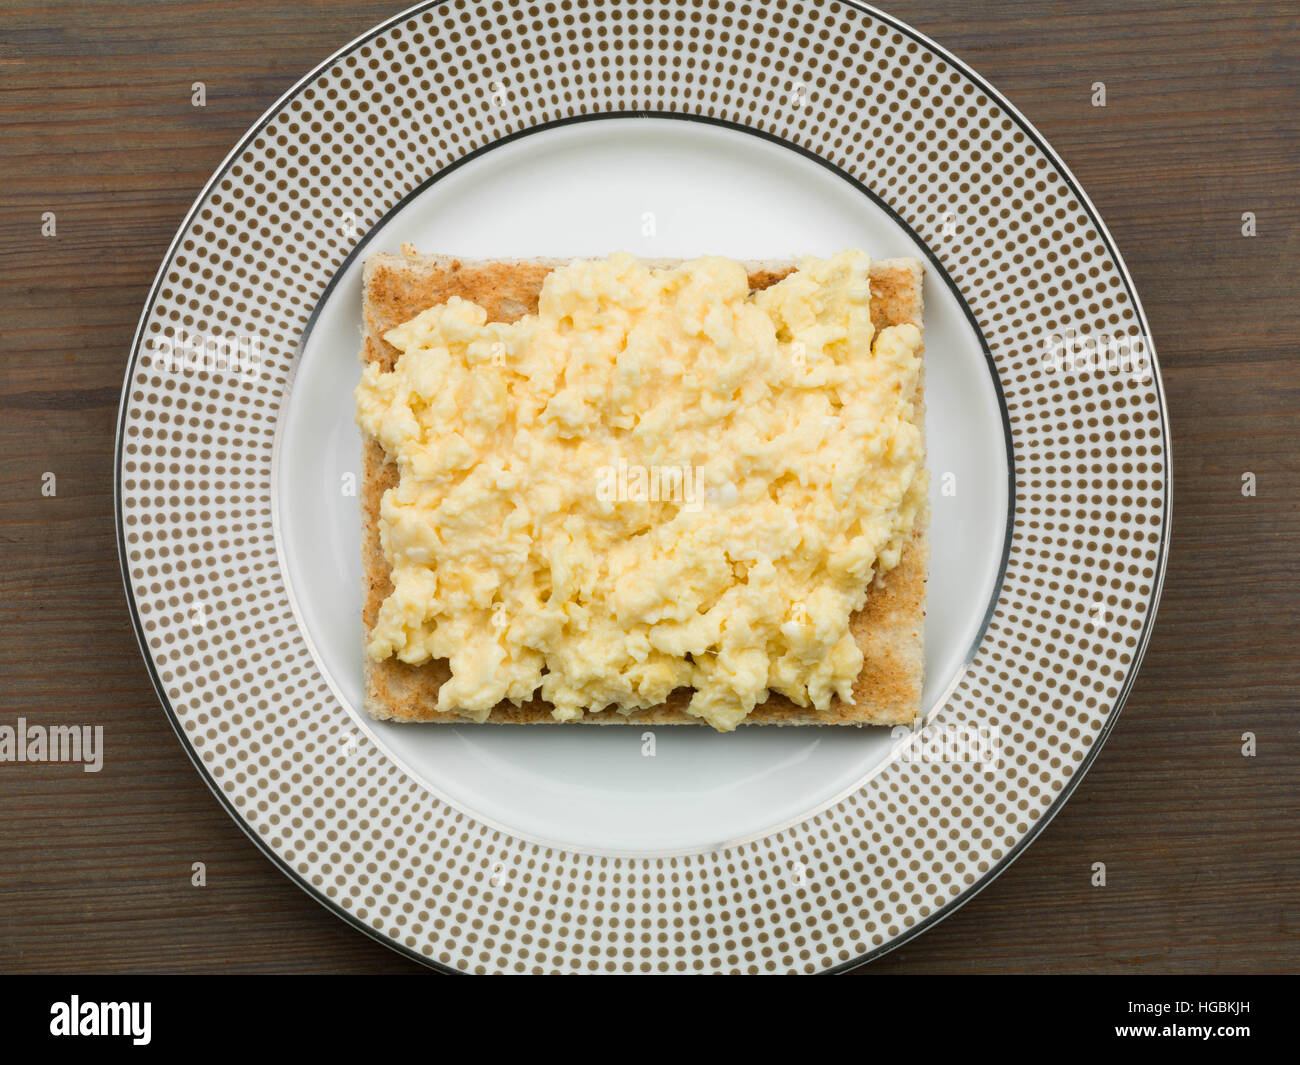 Healthy Calorie Controlled Cooked Breakfast Of Fresh Scrambled Eggs On Toast Meal Ready To Eat With No People And A Flat Lay Composition Stock Photo